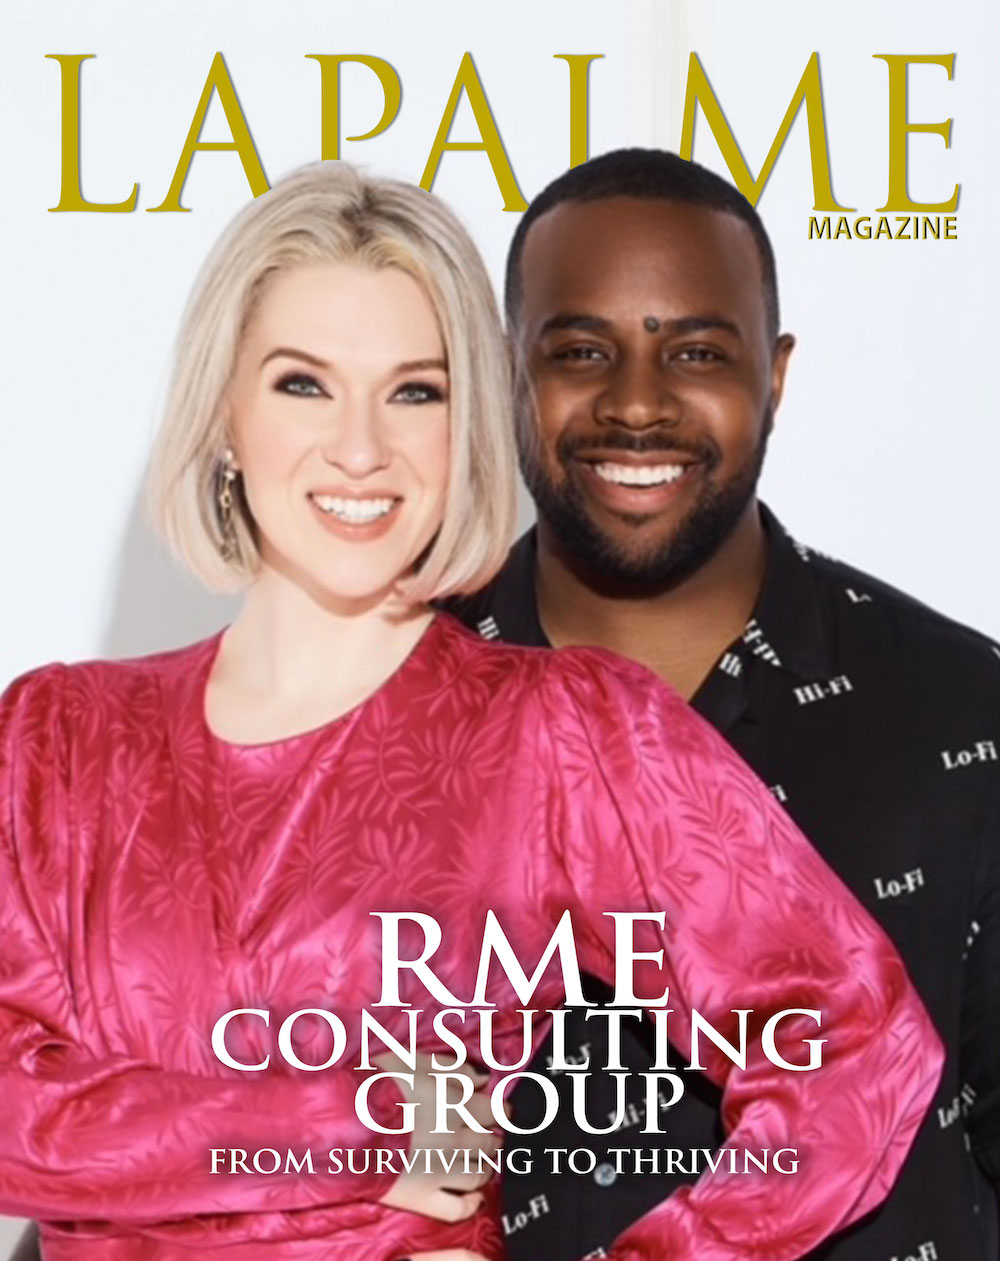 RME CONSULTING GROUP: FROM SURVIVING TO THRIVING